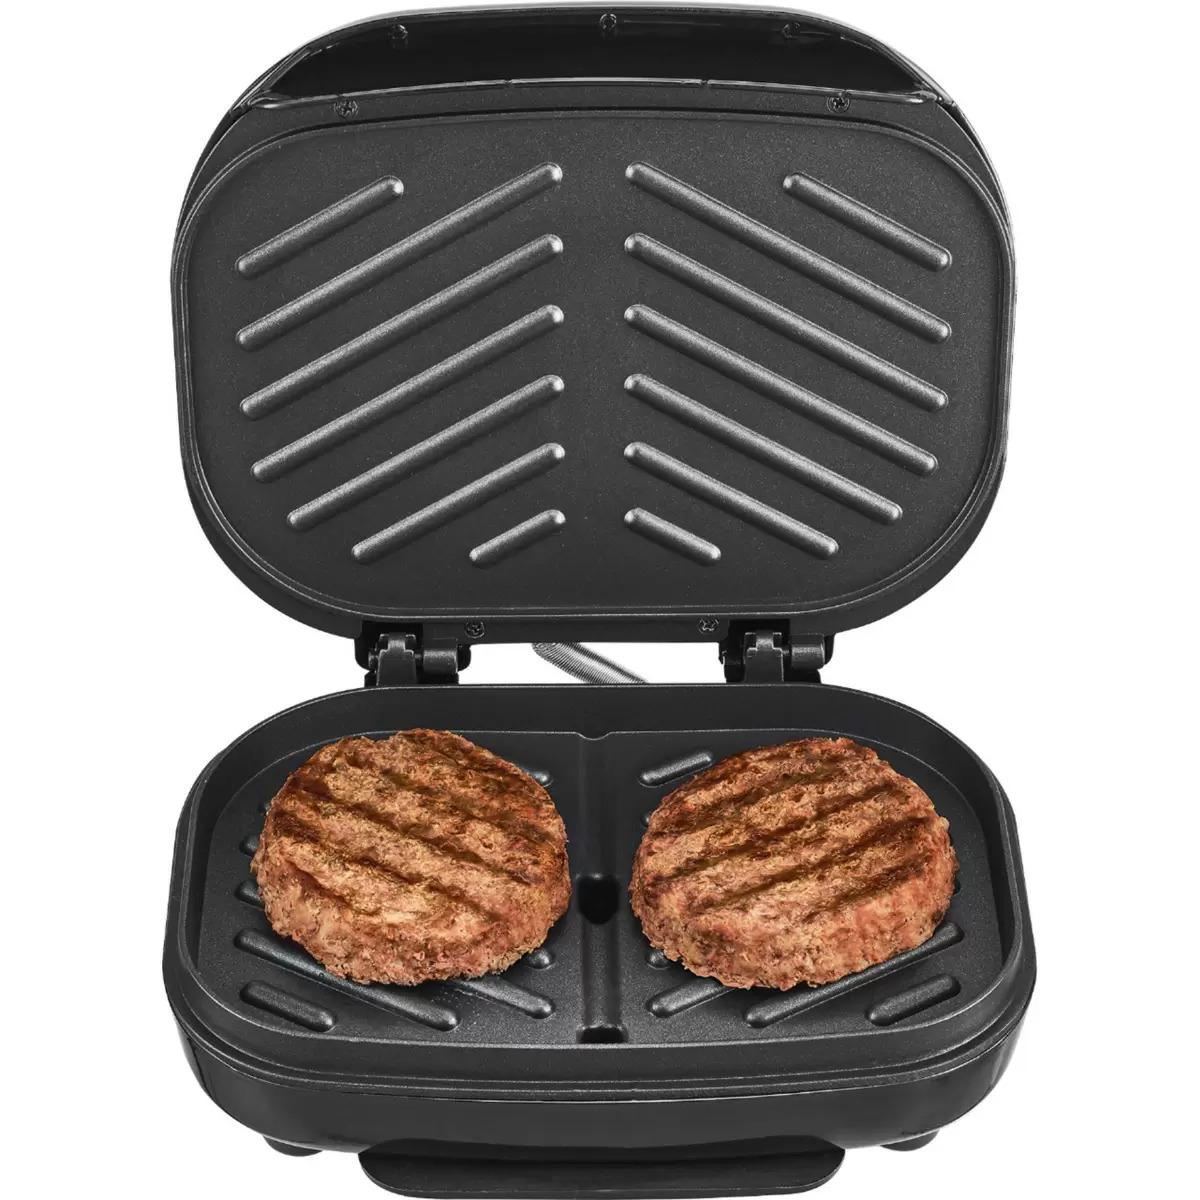 Bella 2-Burger Electric Grill for $8.99